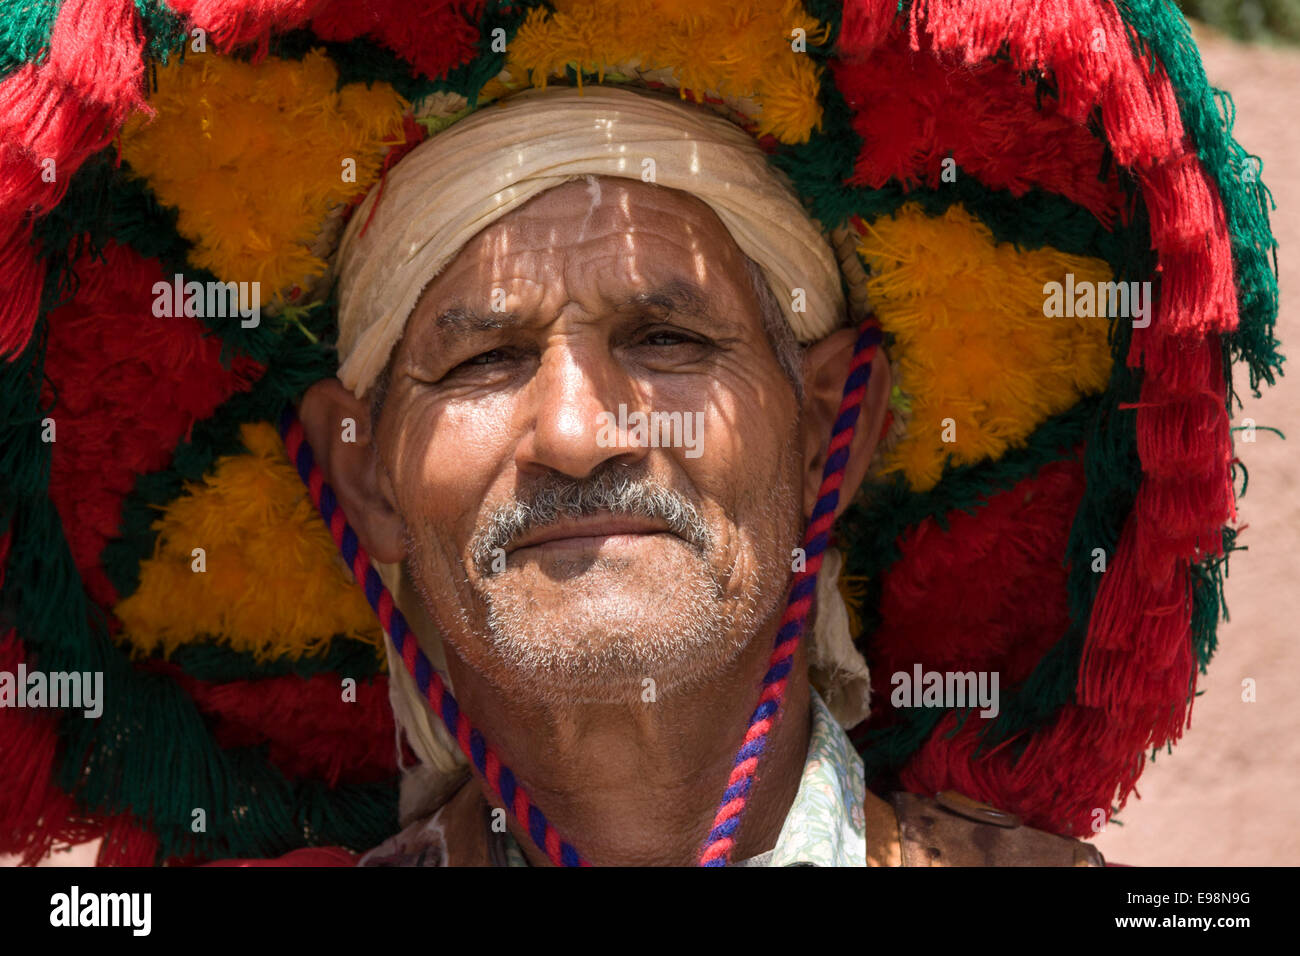 Berber man in traditional red hat and clothing on Jemaa el Fna, Marrakech, Morocco Stock Photo